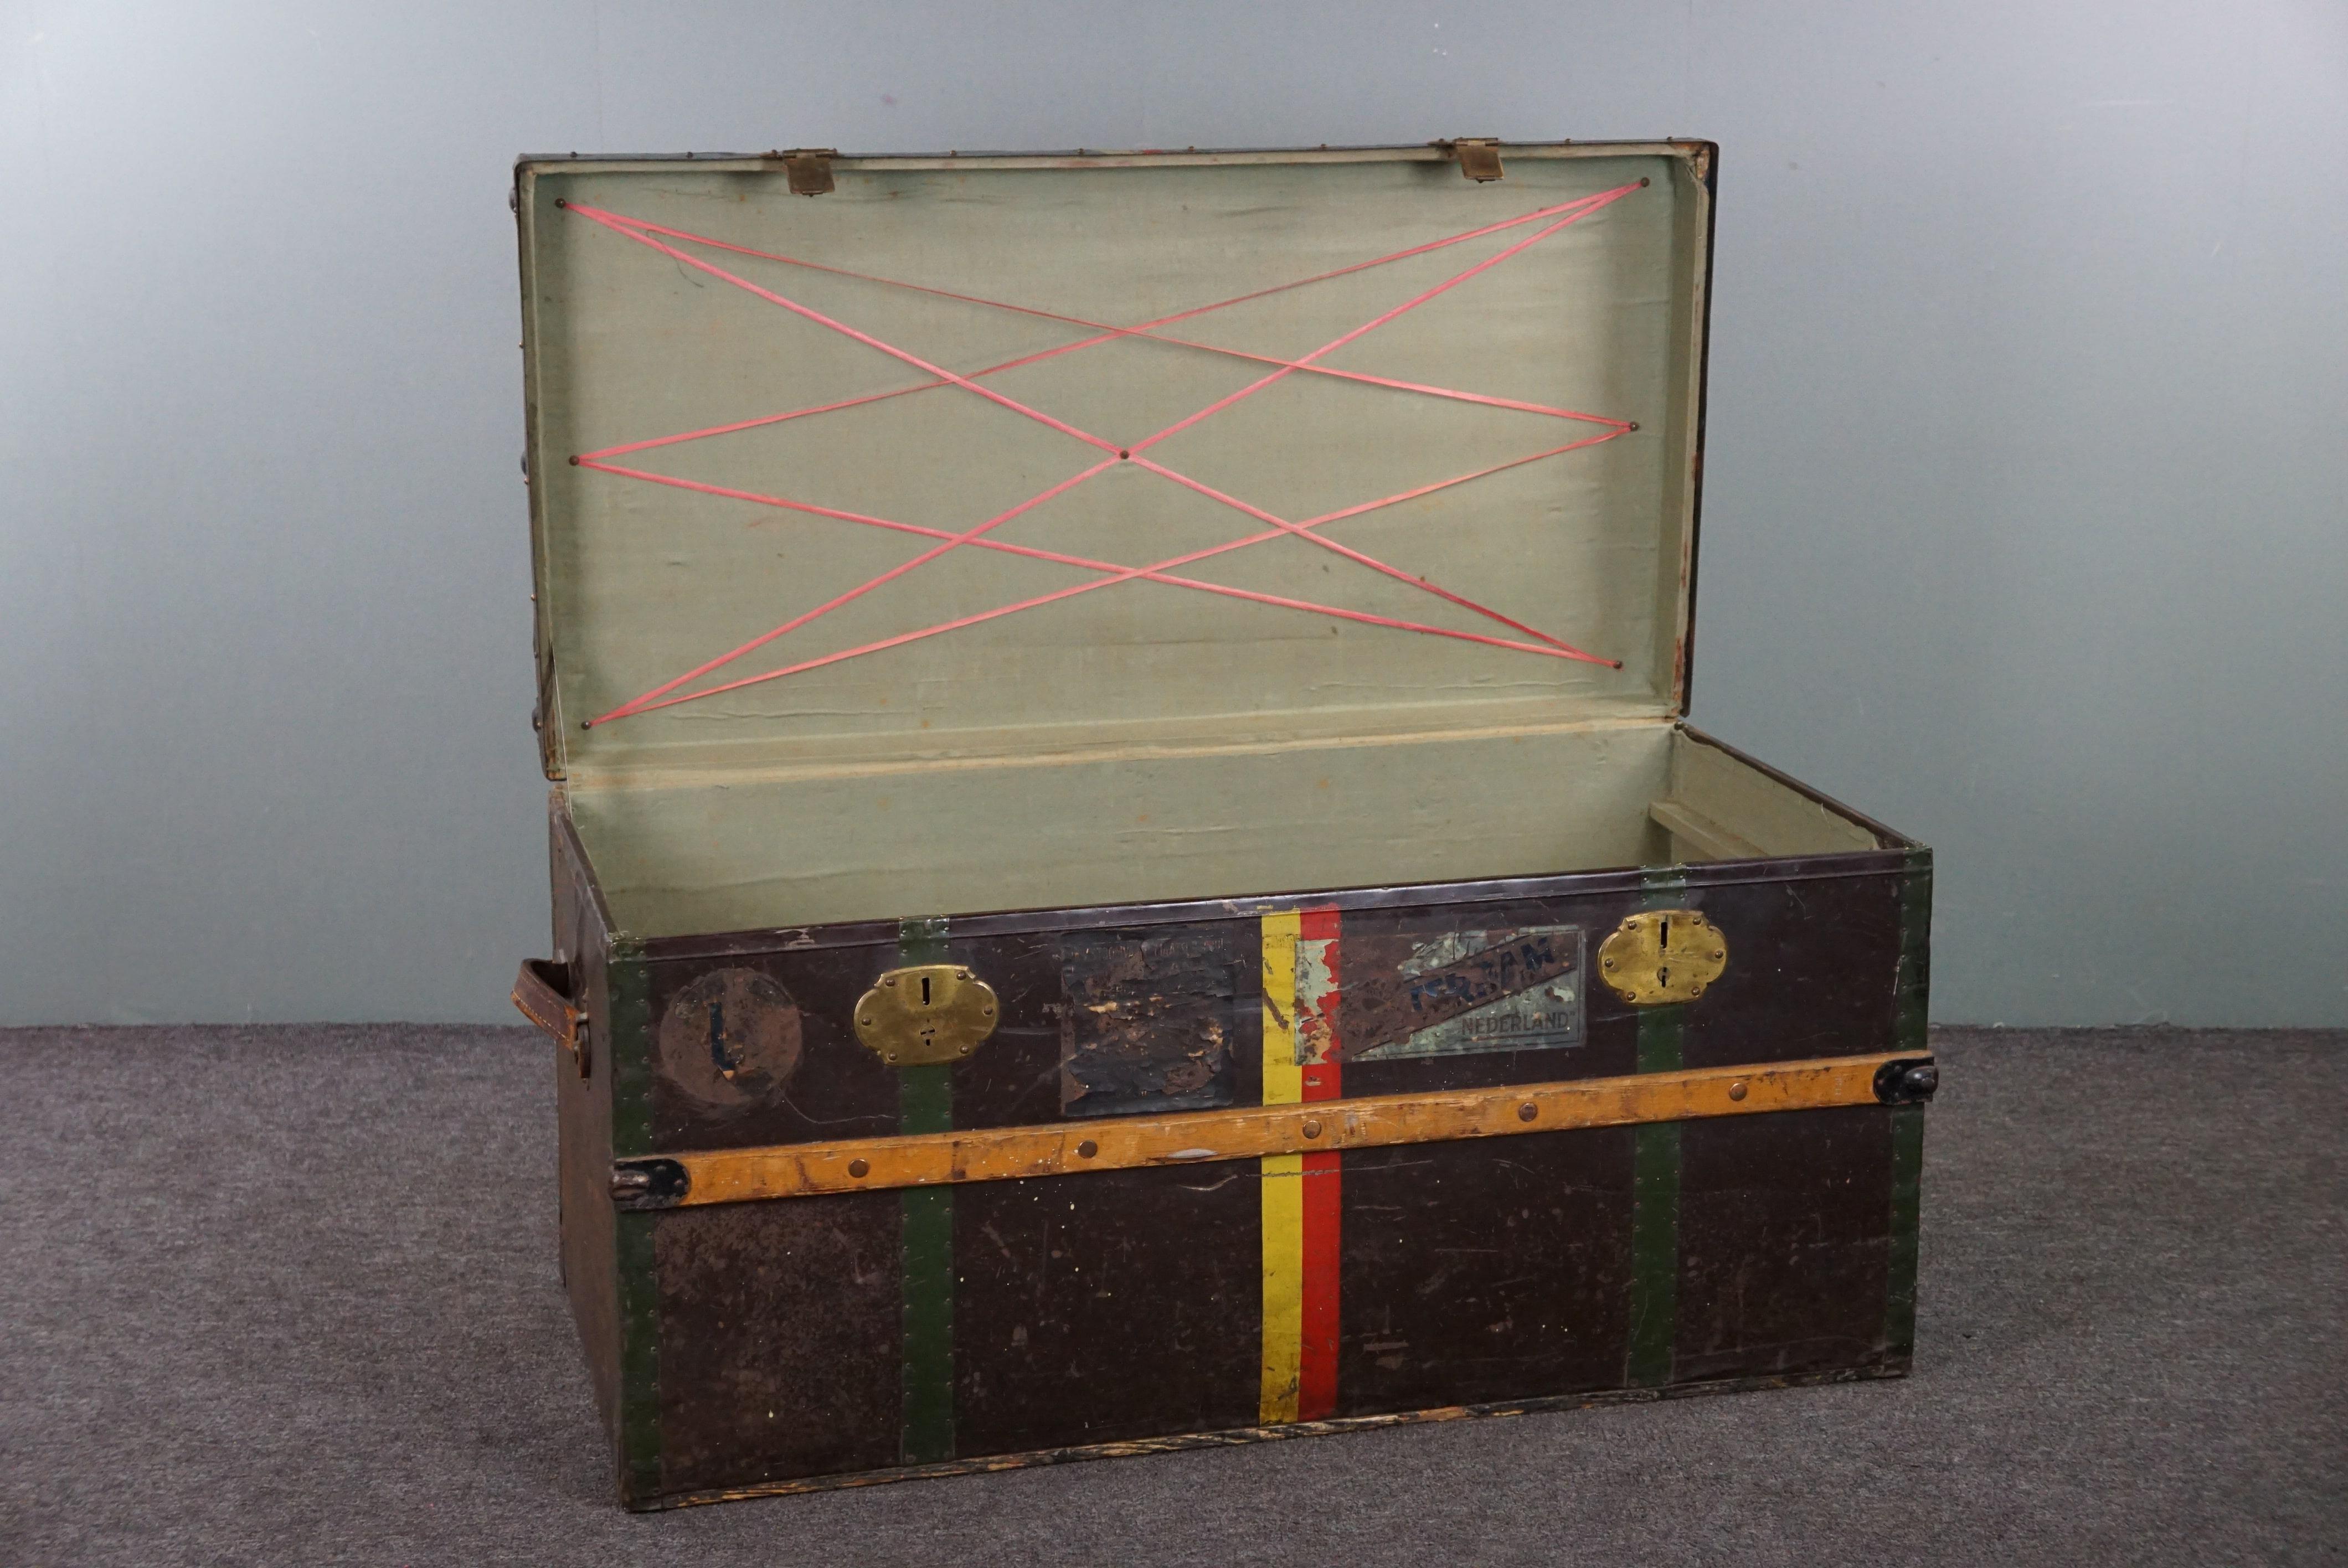 Offered is this wonderfully charming large antique suitcase/ chest with fantastic colors and original labels. A delightful large antique chest for enthusiasts. This charming item can be used for decoration, as a coffee table or low cabinet, or,